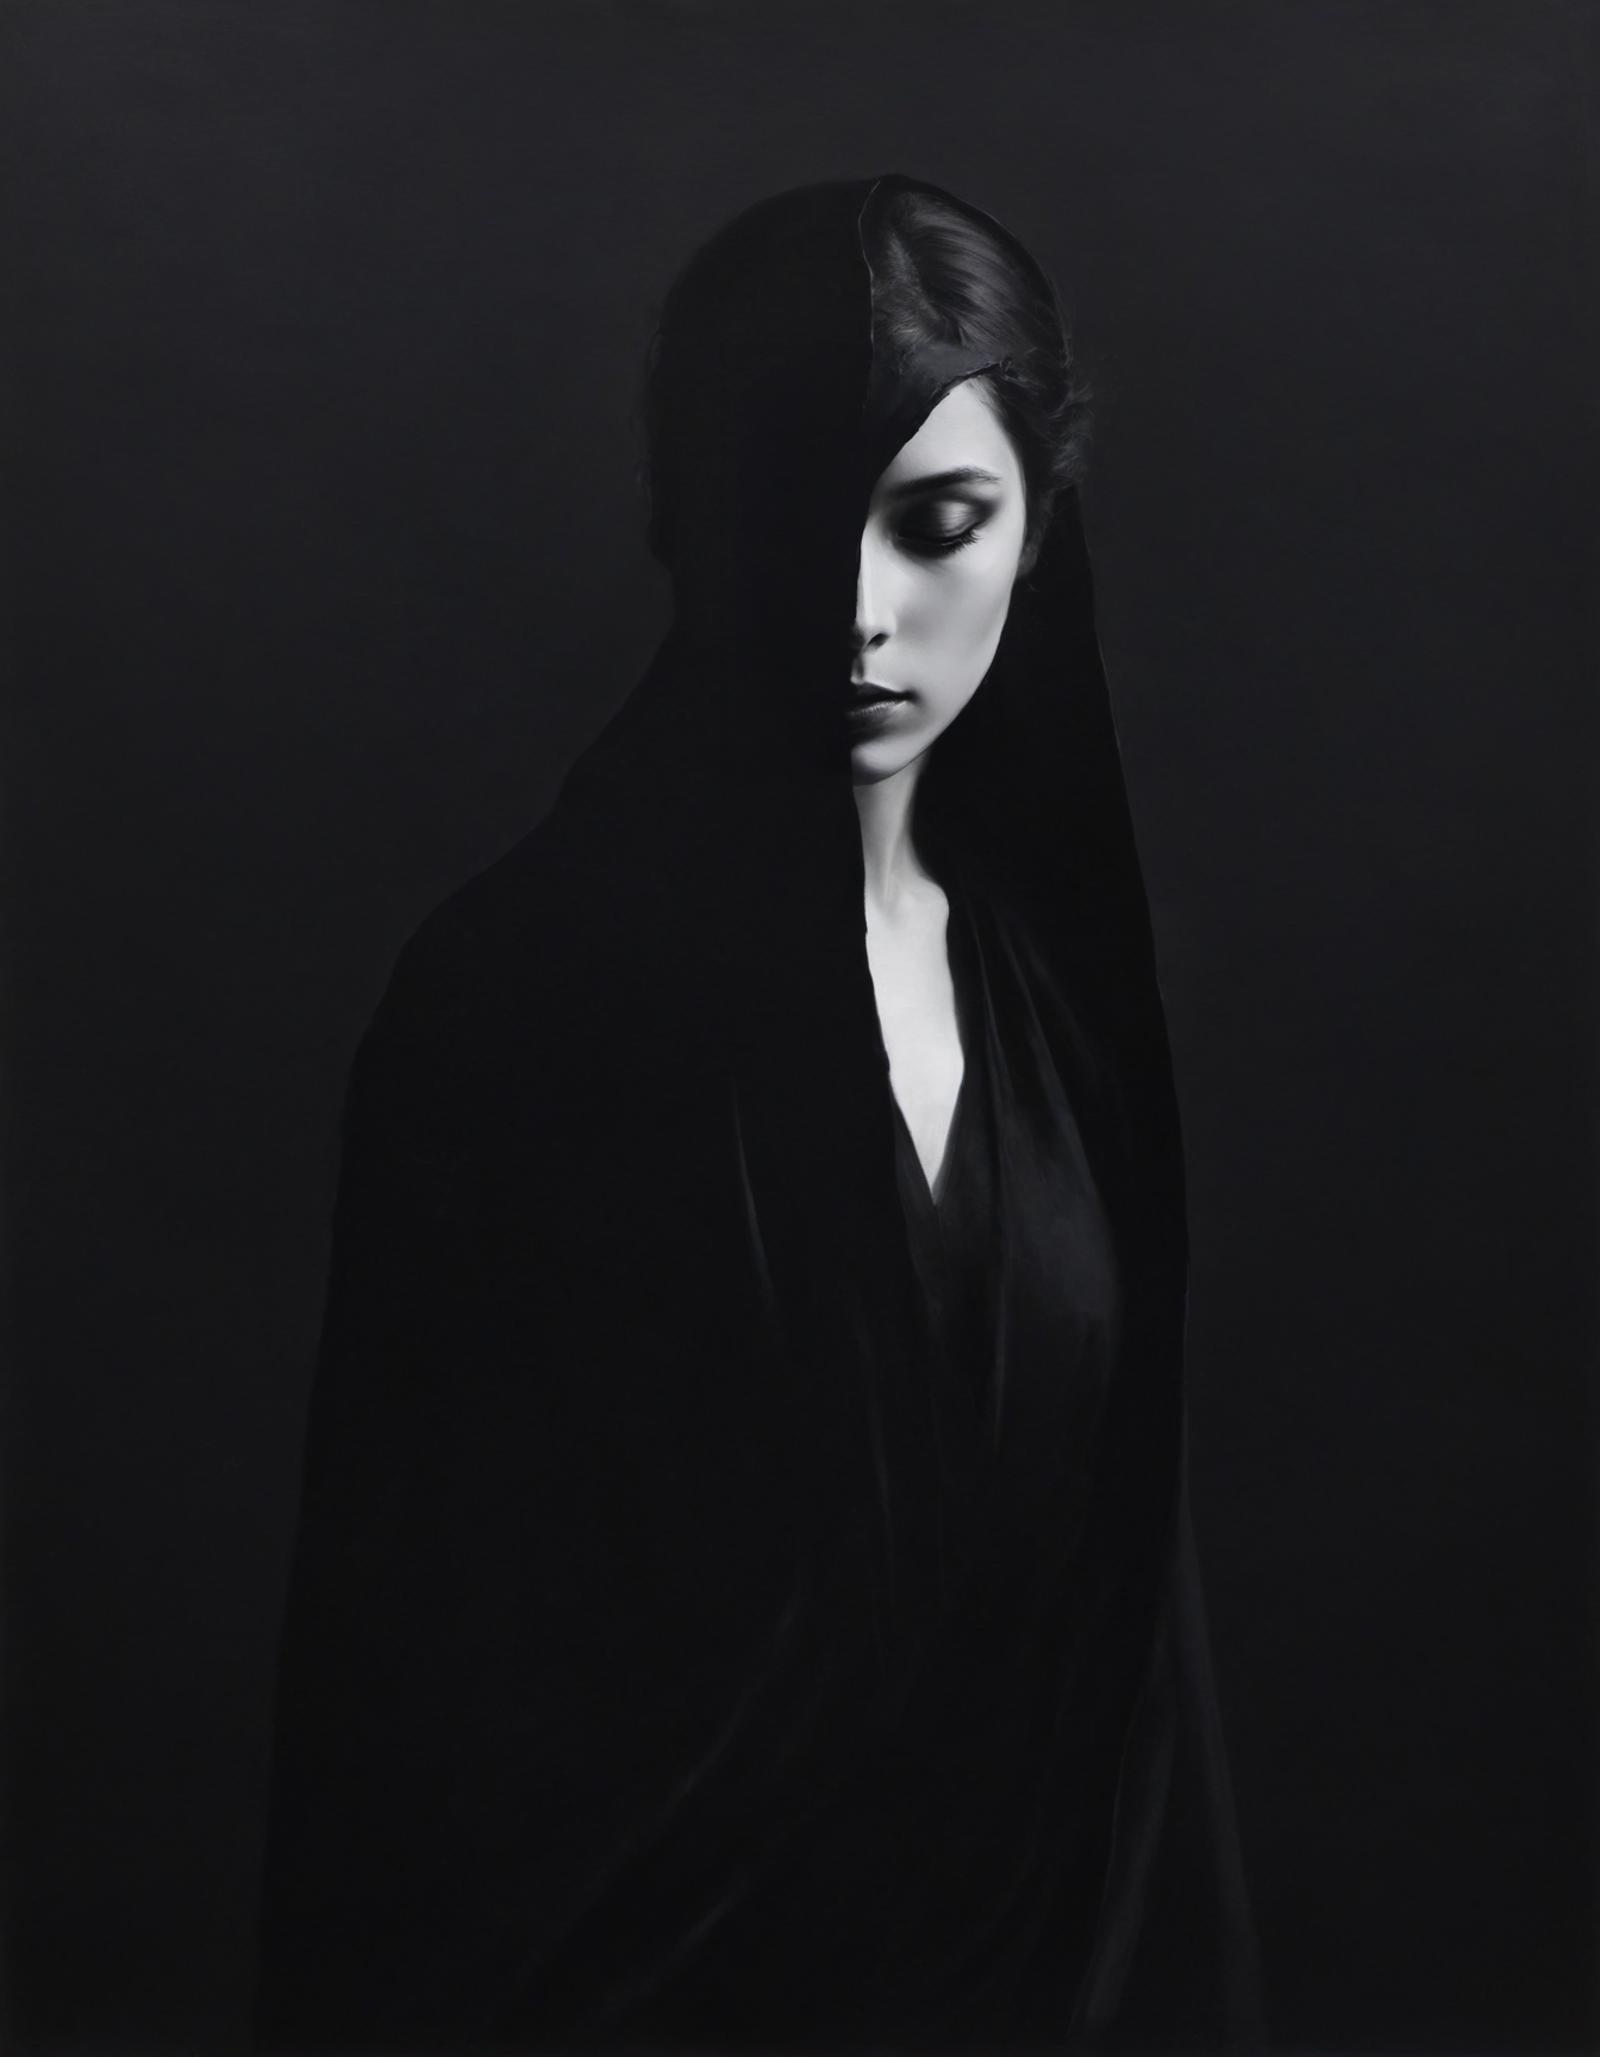 A woman with a veil on her head and a black top standing in a dark room.